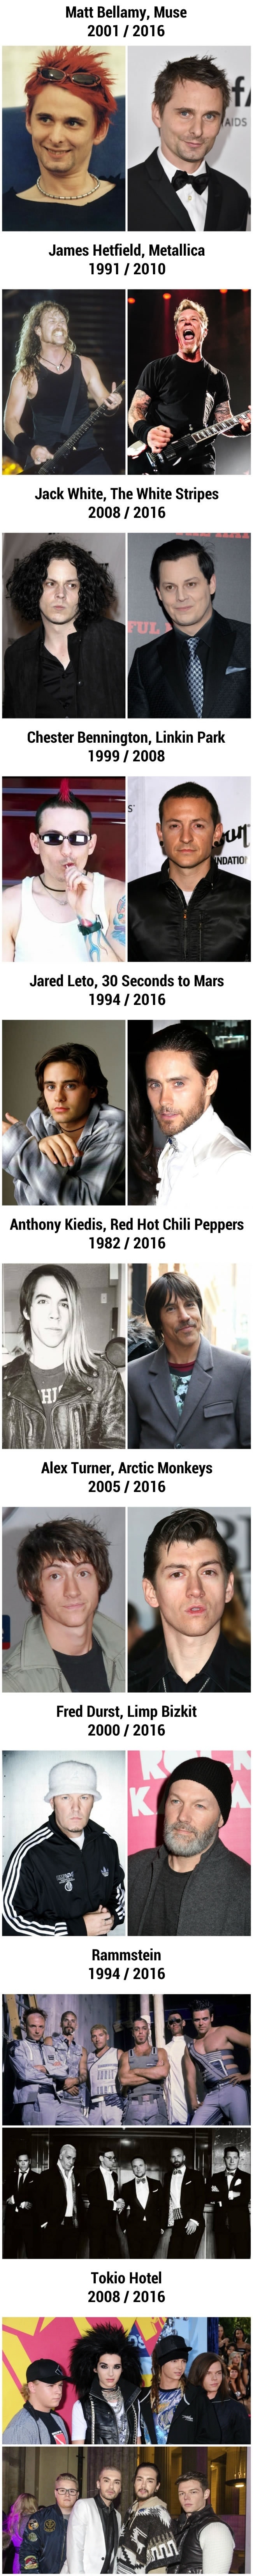 How our favorite rock stars have changed